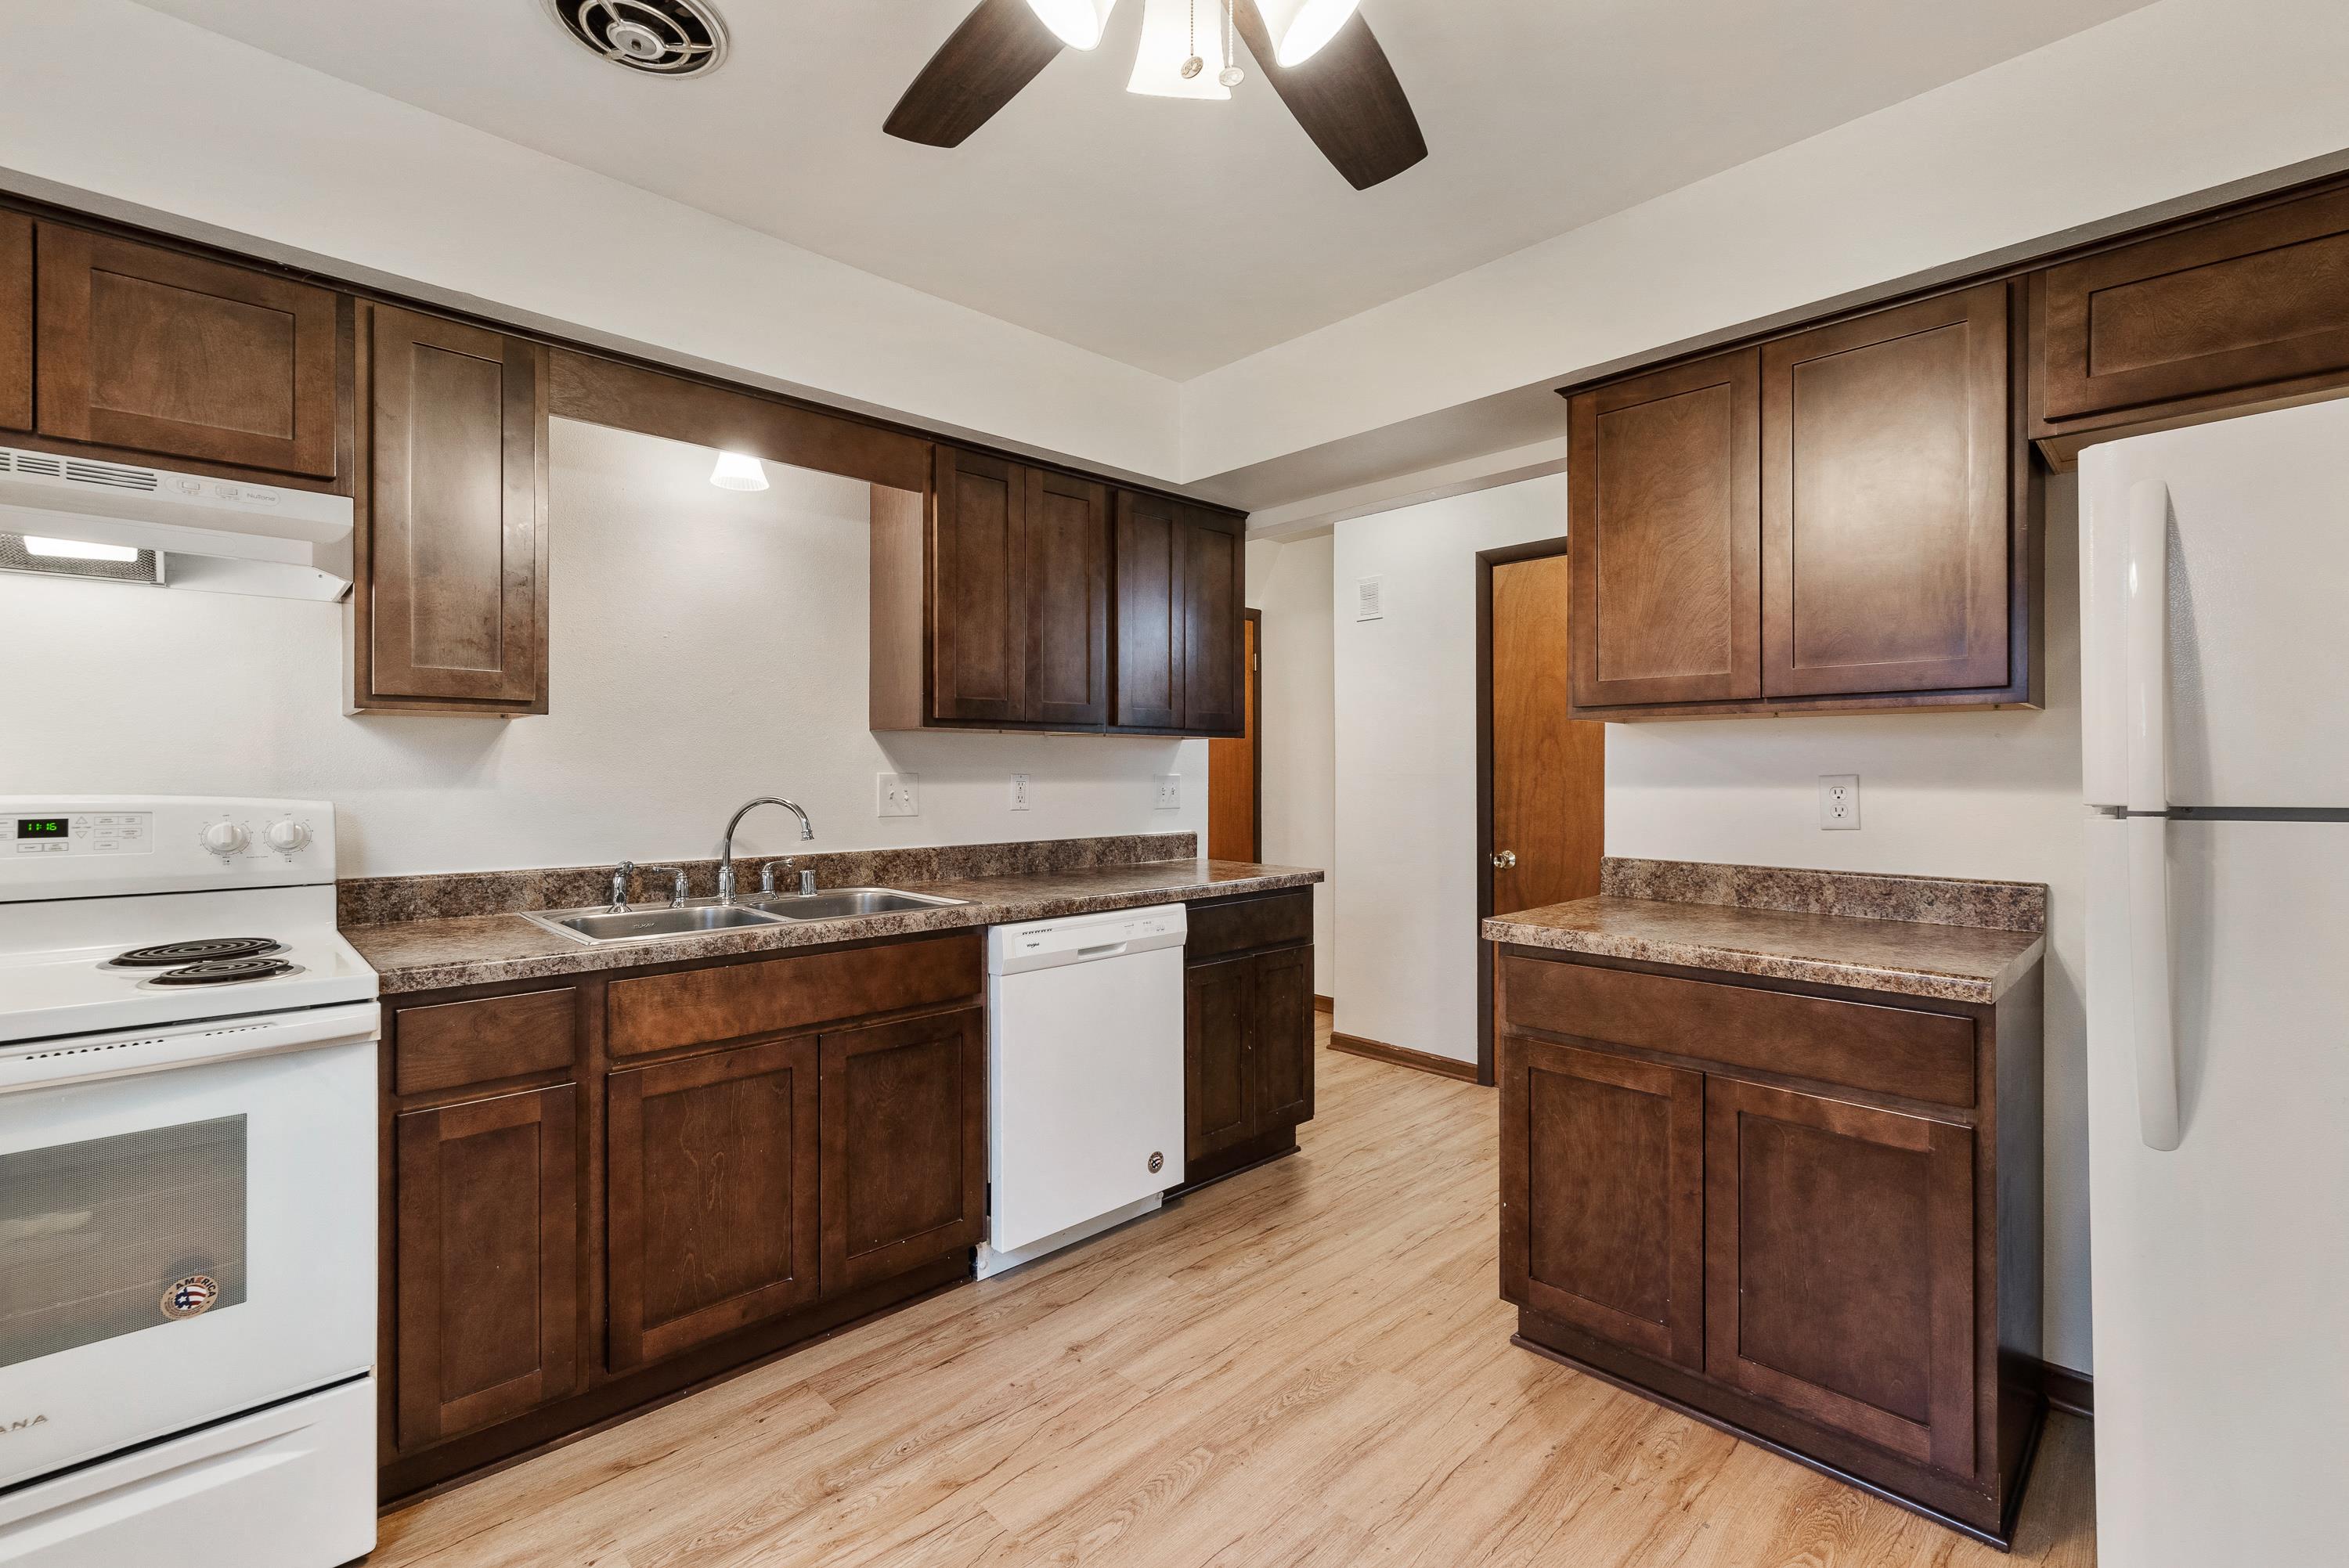 90th Street Townhomes Kitchen